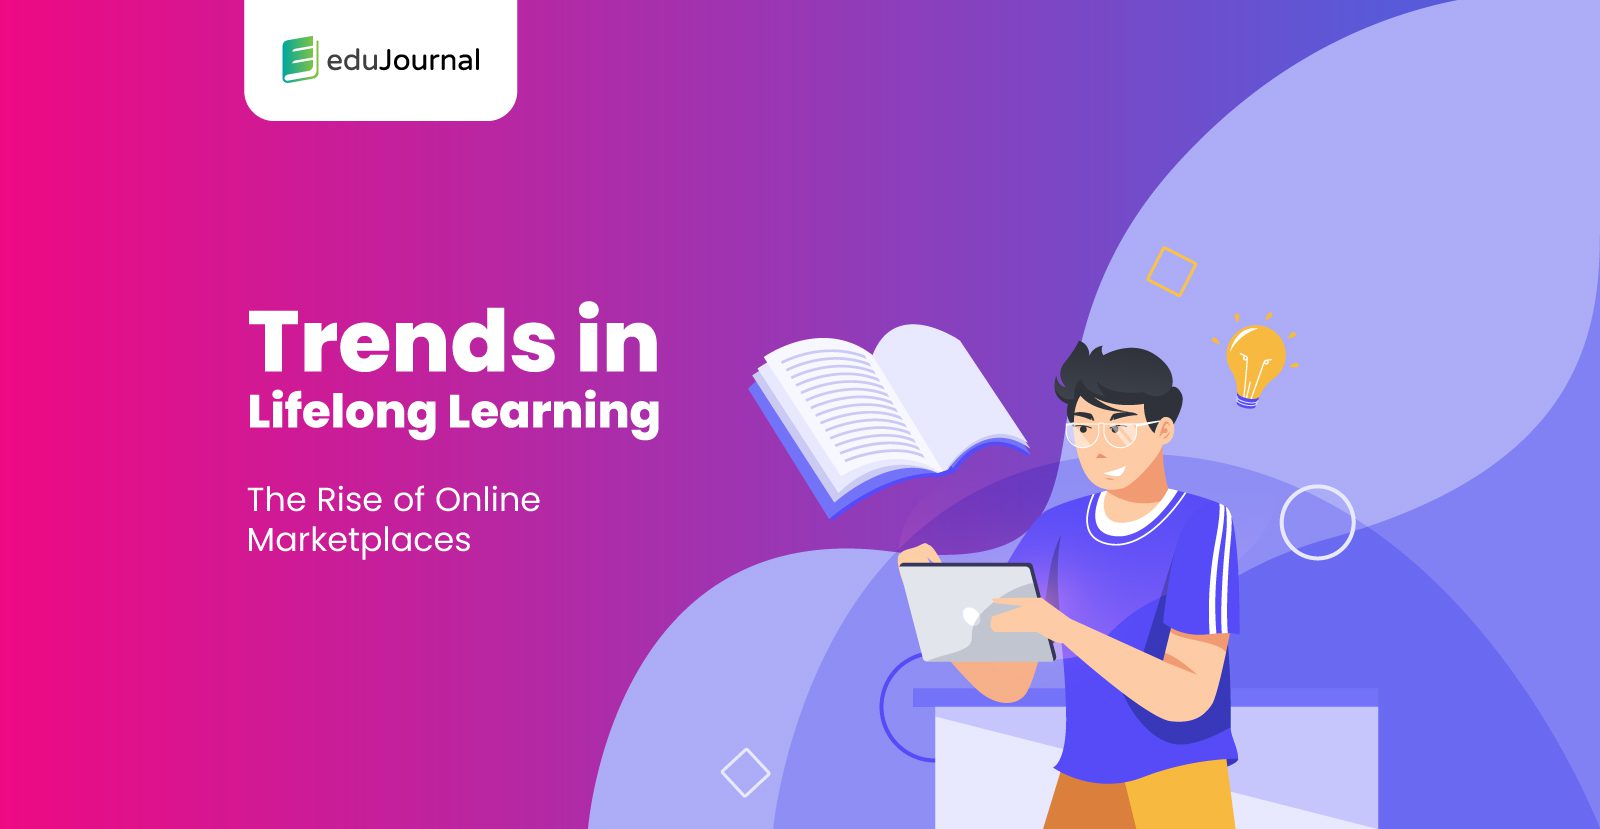 Trends in lifelong learning